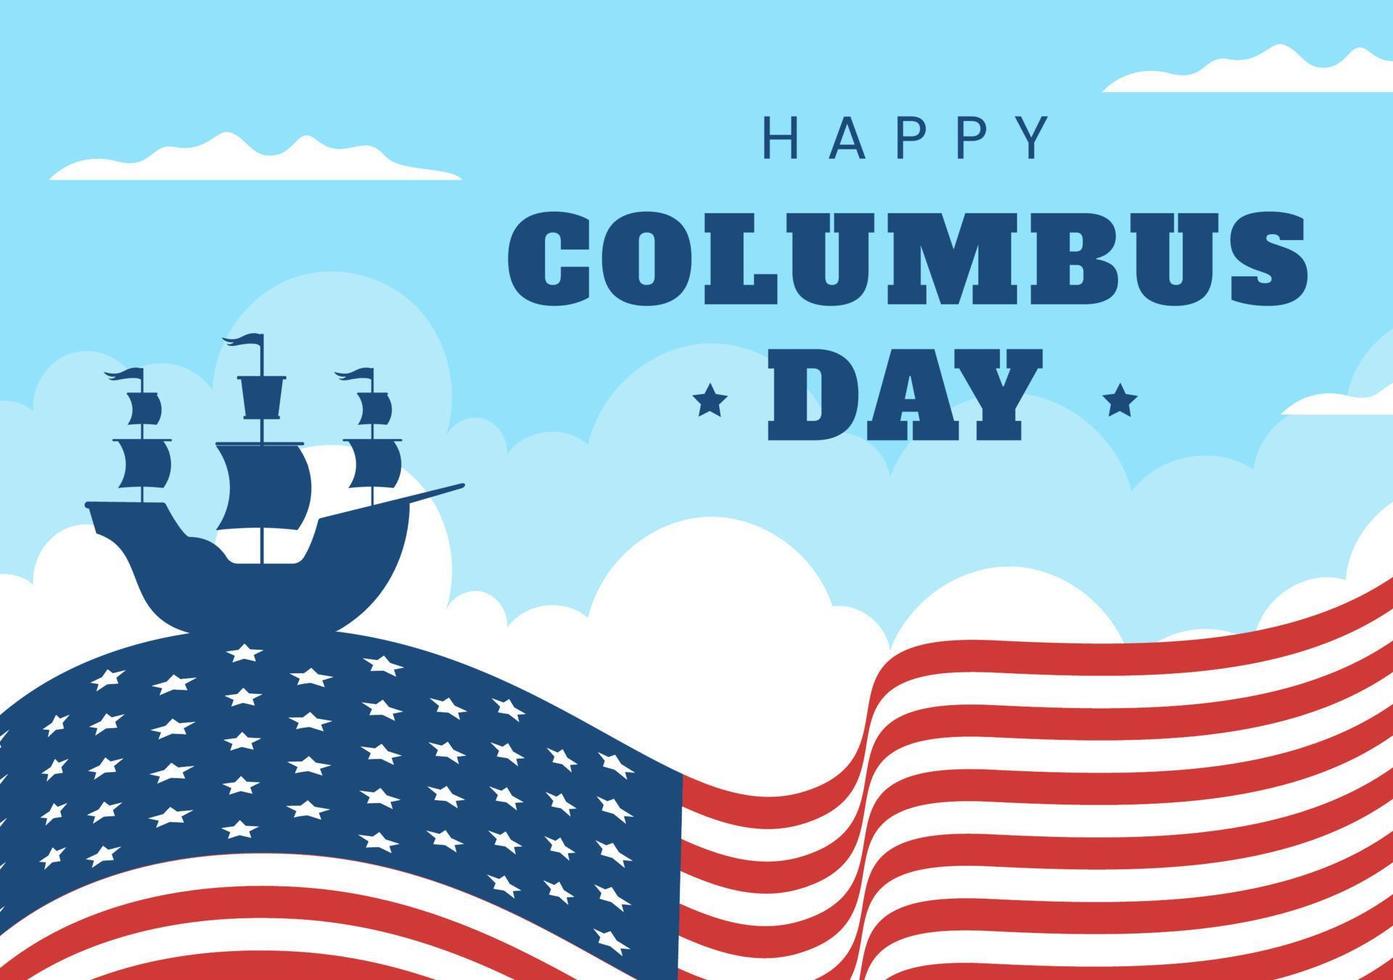 Happy Columbus Day National Holiday Hand Drawn Cartoon Illustration with Blue Waves, Compass, Ship and USA Flags in Flat Style Background vector